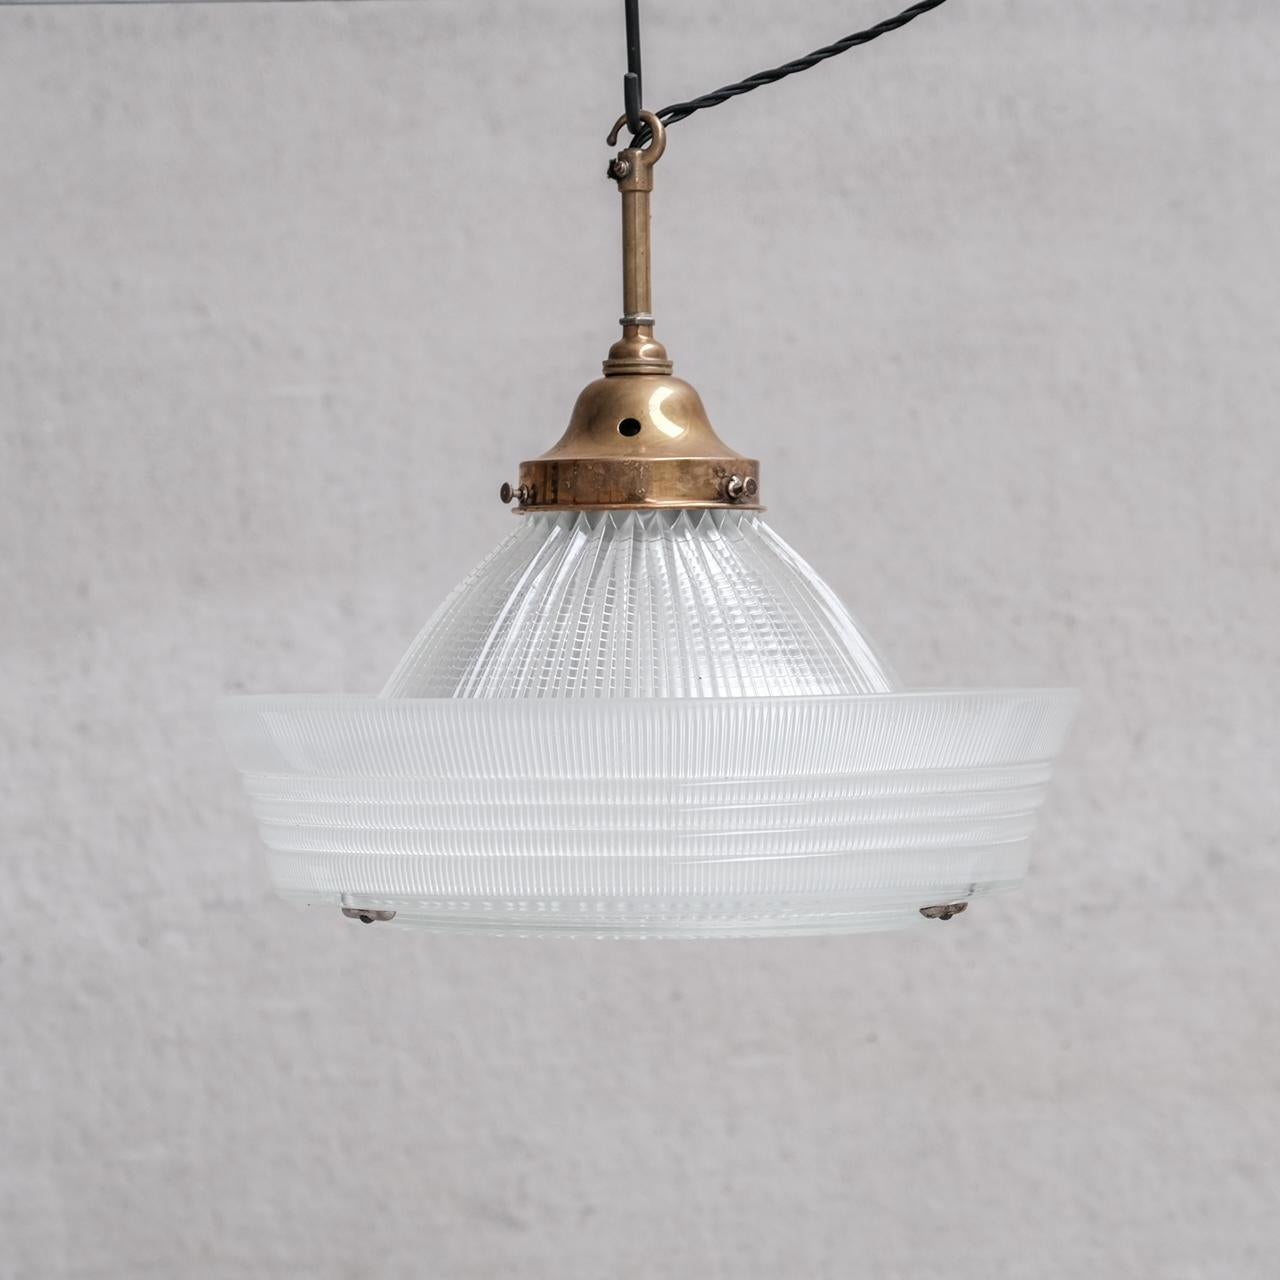 A large holophane style pendant light of unusual form - almost a 'sailors hat'.

France, c1930s.

Since re-wired and PAT tested.

No Chain or Rose was retained so will not be provided. They can be sourced easily online.

Internal ref: